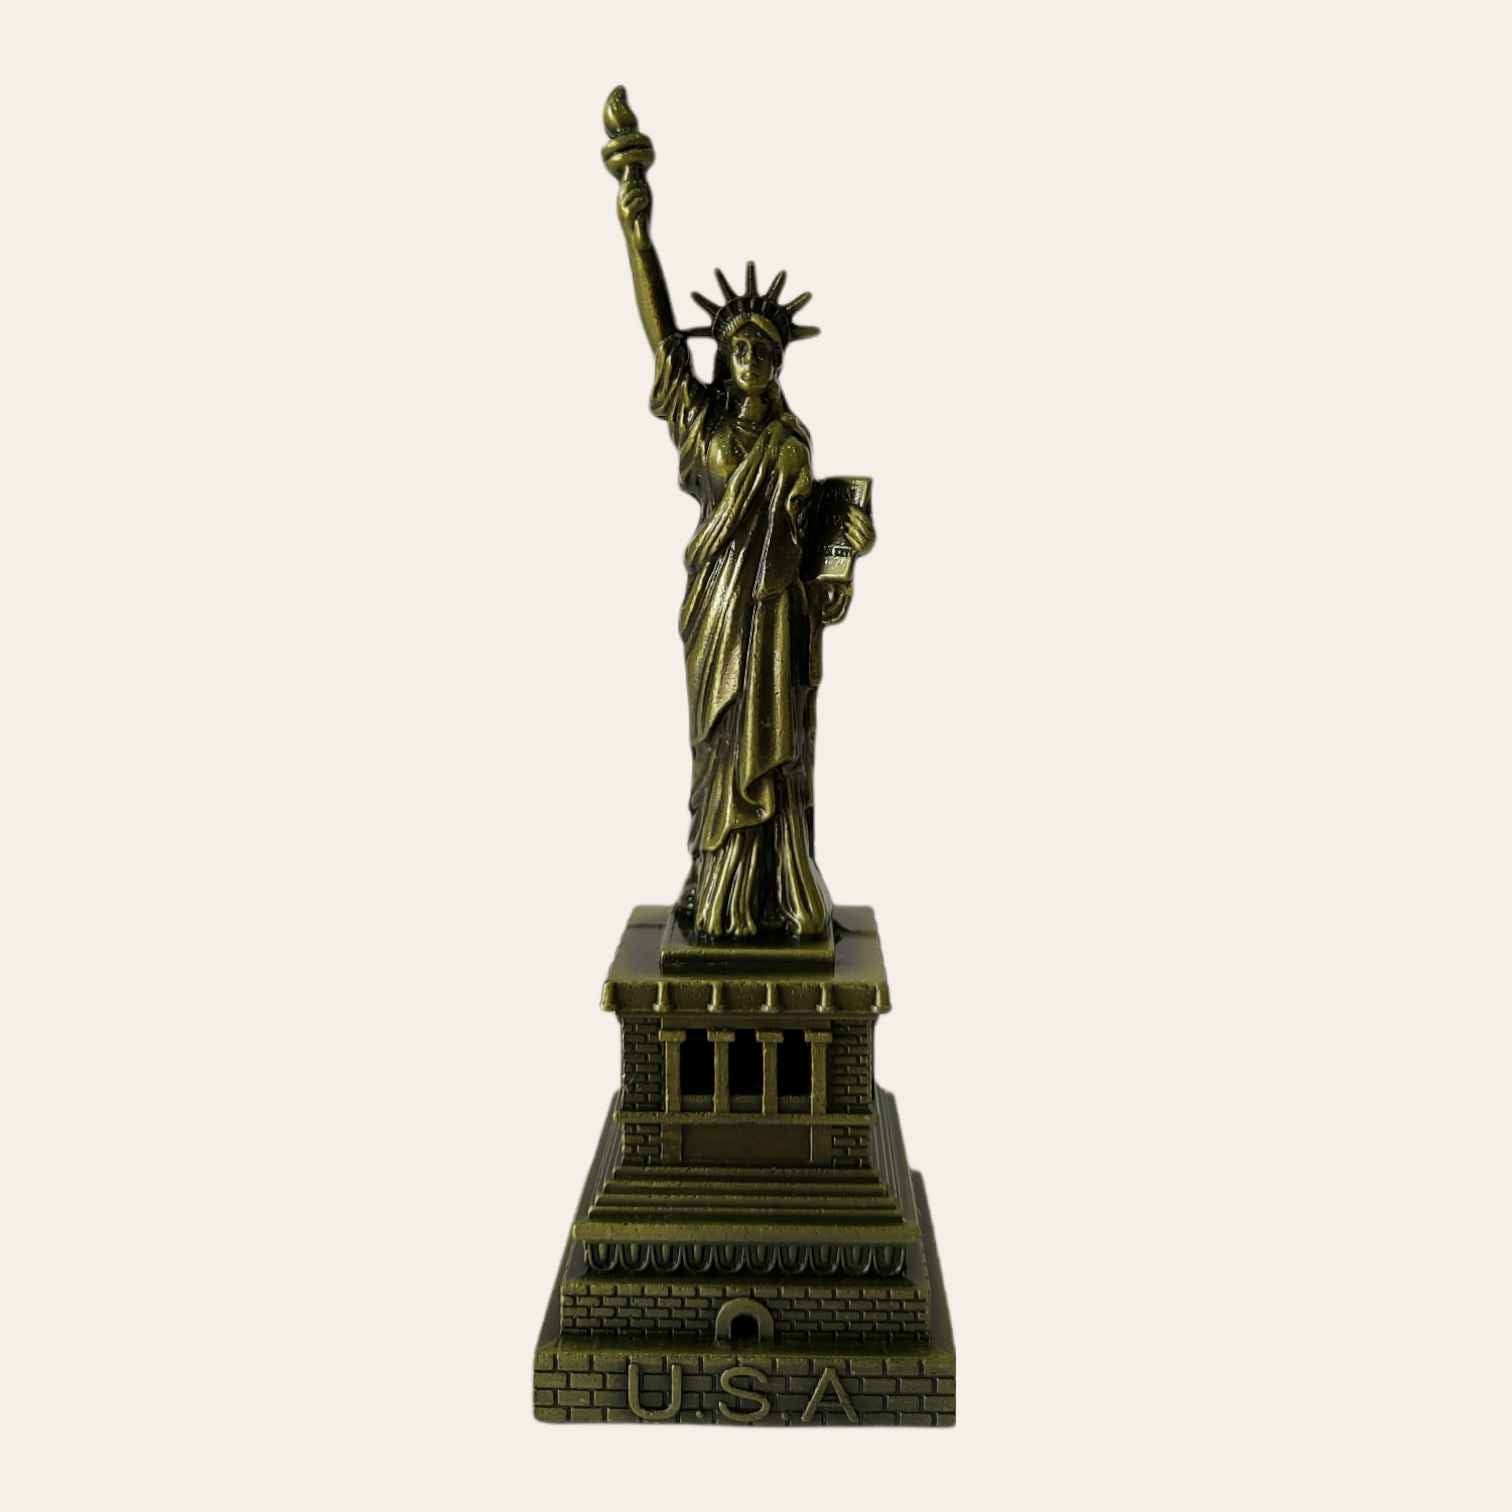 FunkyTradition Statue of Liberty New York City Showpiece for Home Office Decor and Anniversary Birthday Gifts